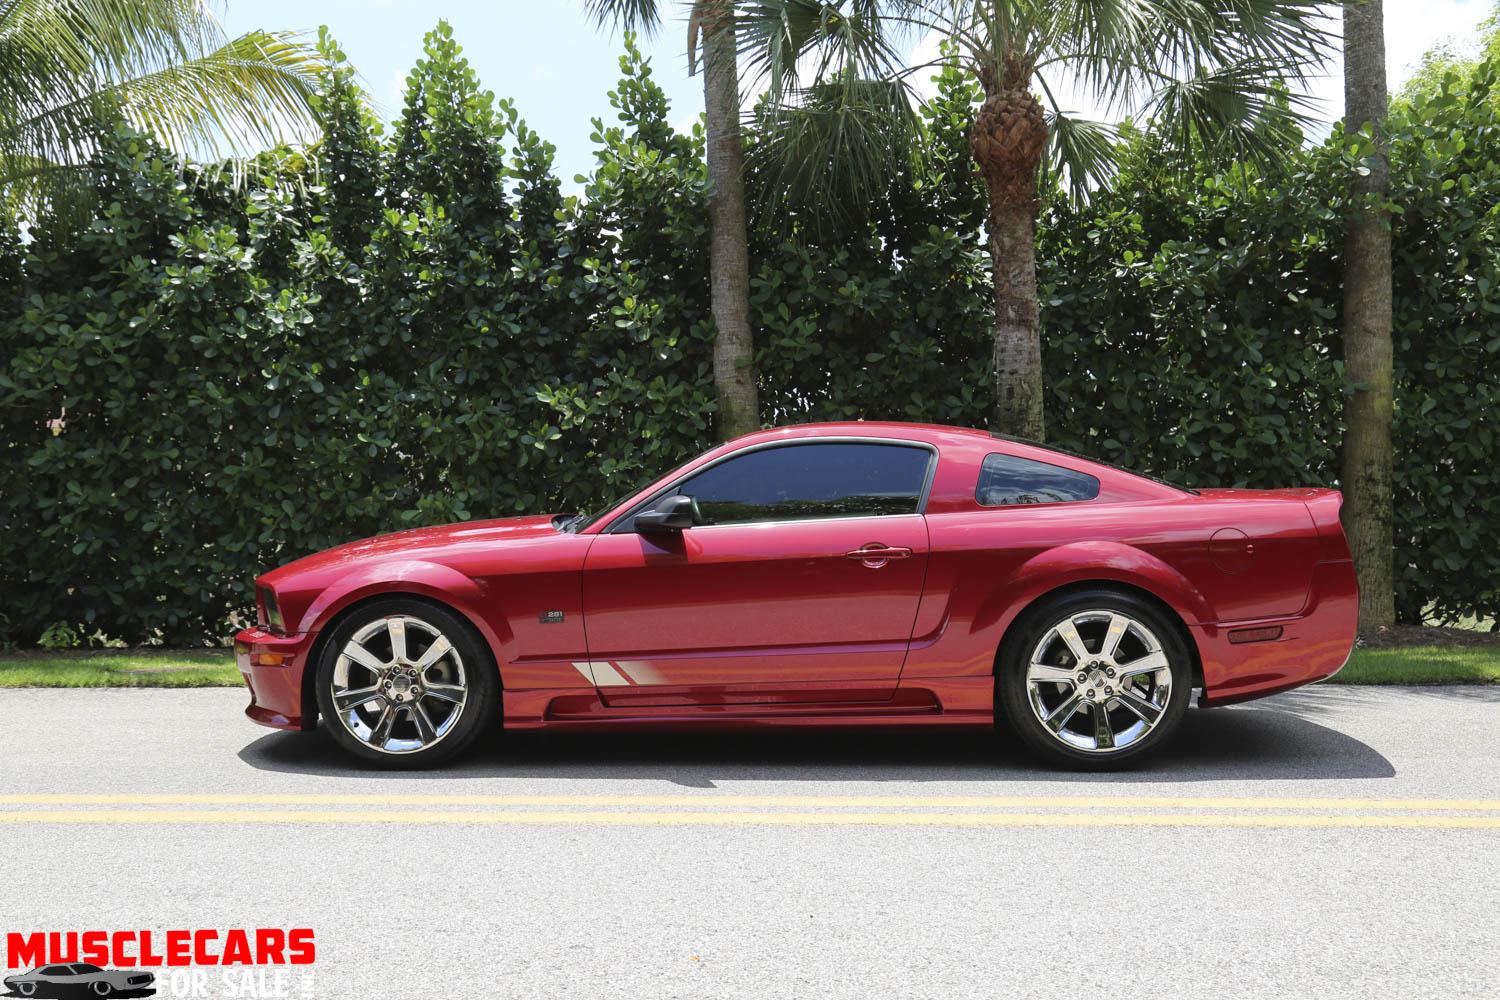 Used 2005 Ford Mustang Saleen Saleen for sale Sold at Muscle Cars for Sale Inc. in Fort Myers FL 33912 7